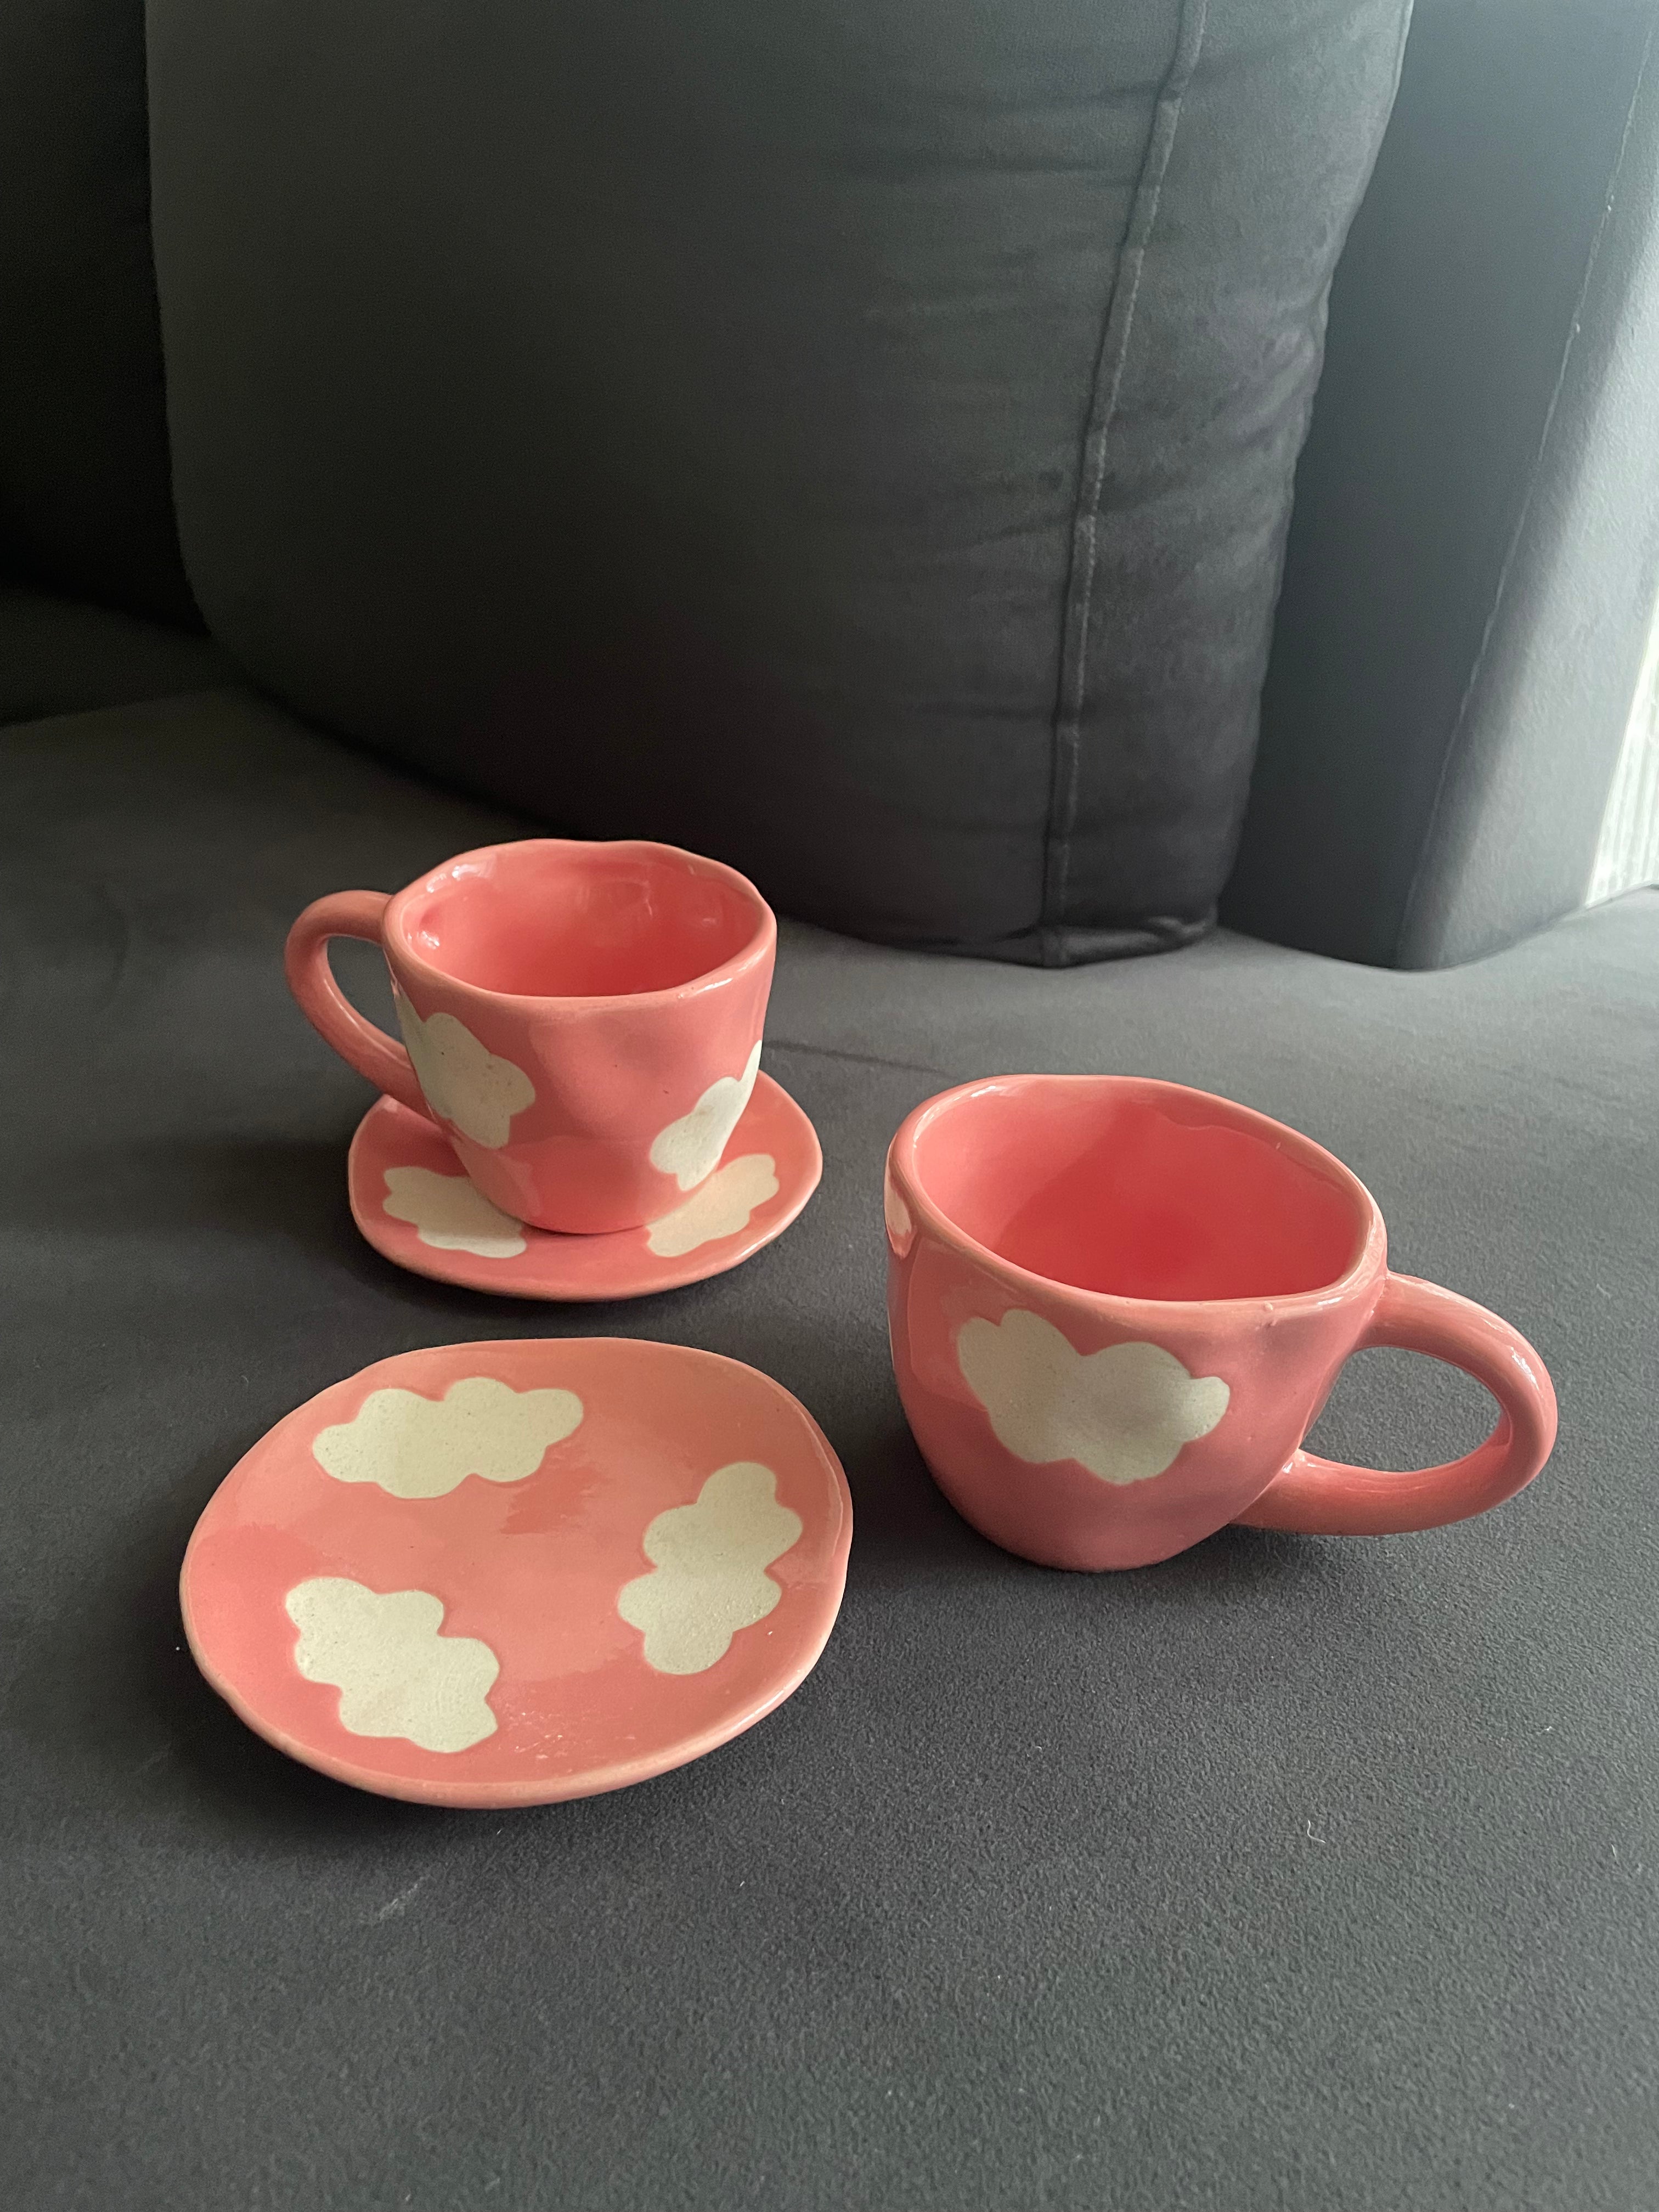 2 Pieces Ceramic Cloud Mug Cute Cup with Coaster 7oz Cute Ceramic Coffee  Mug with Saucer Set for Office Home Coffee Tea Latte Milk, Pink and Pearl